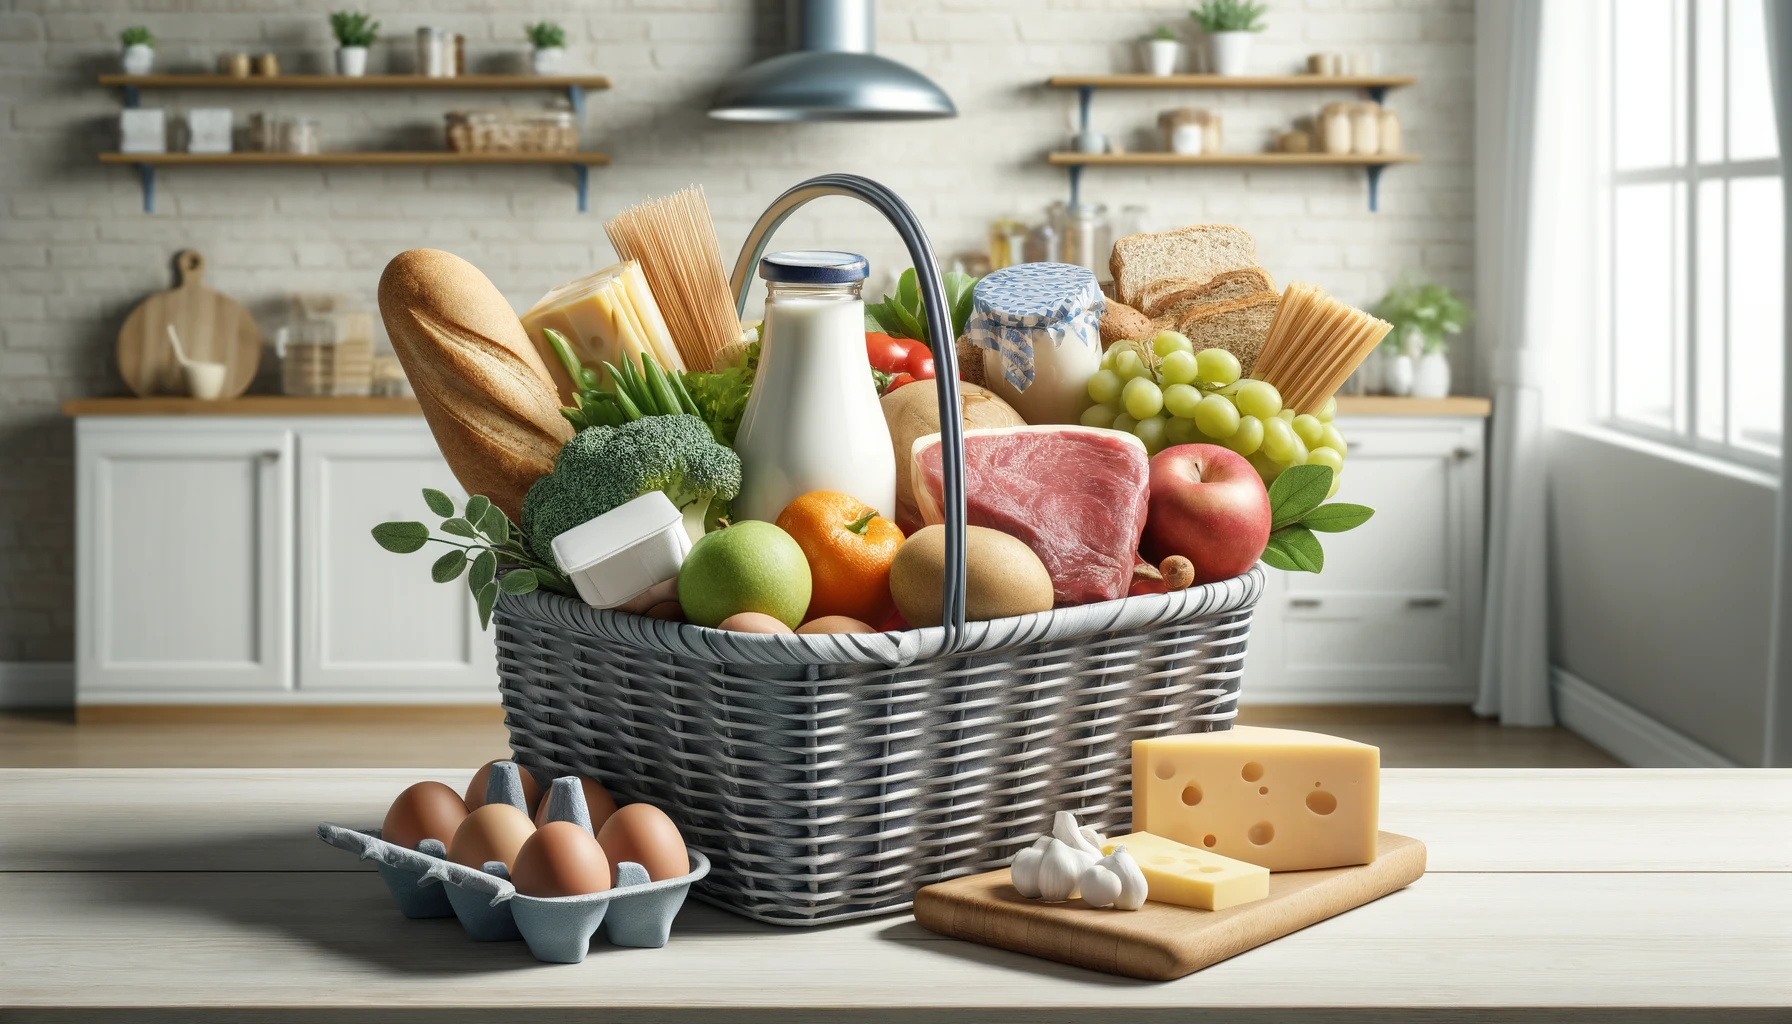 basket full of economical and nutritious foods on a kitchen table. The basket includes milk cheese eggs lean cuts of me